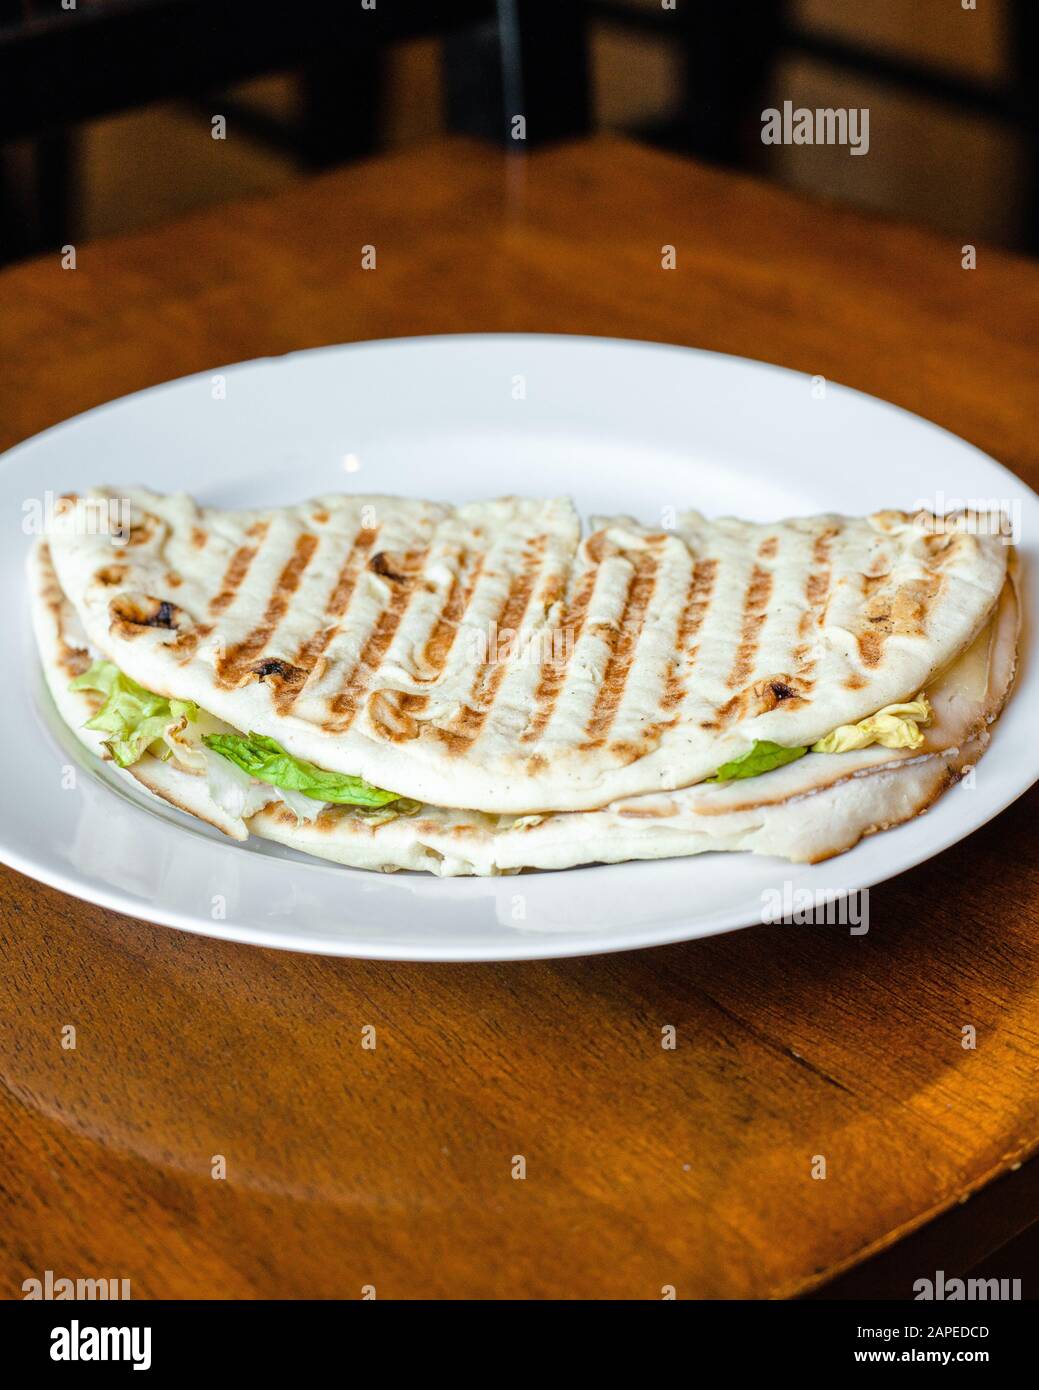 Grilled panini pita bread sandwich with turkey, cheese, lettuce on a white plate front view close up Stock Photo